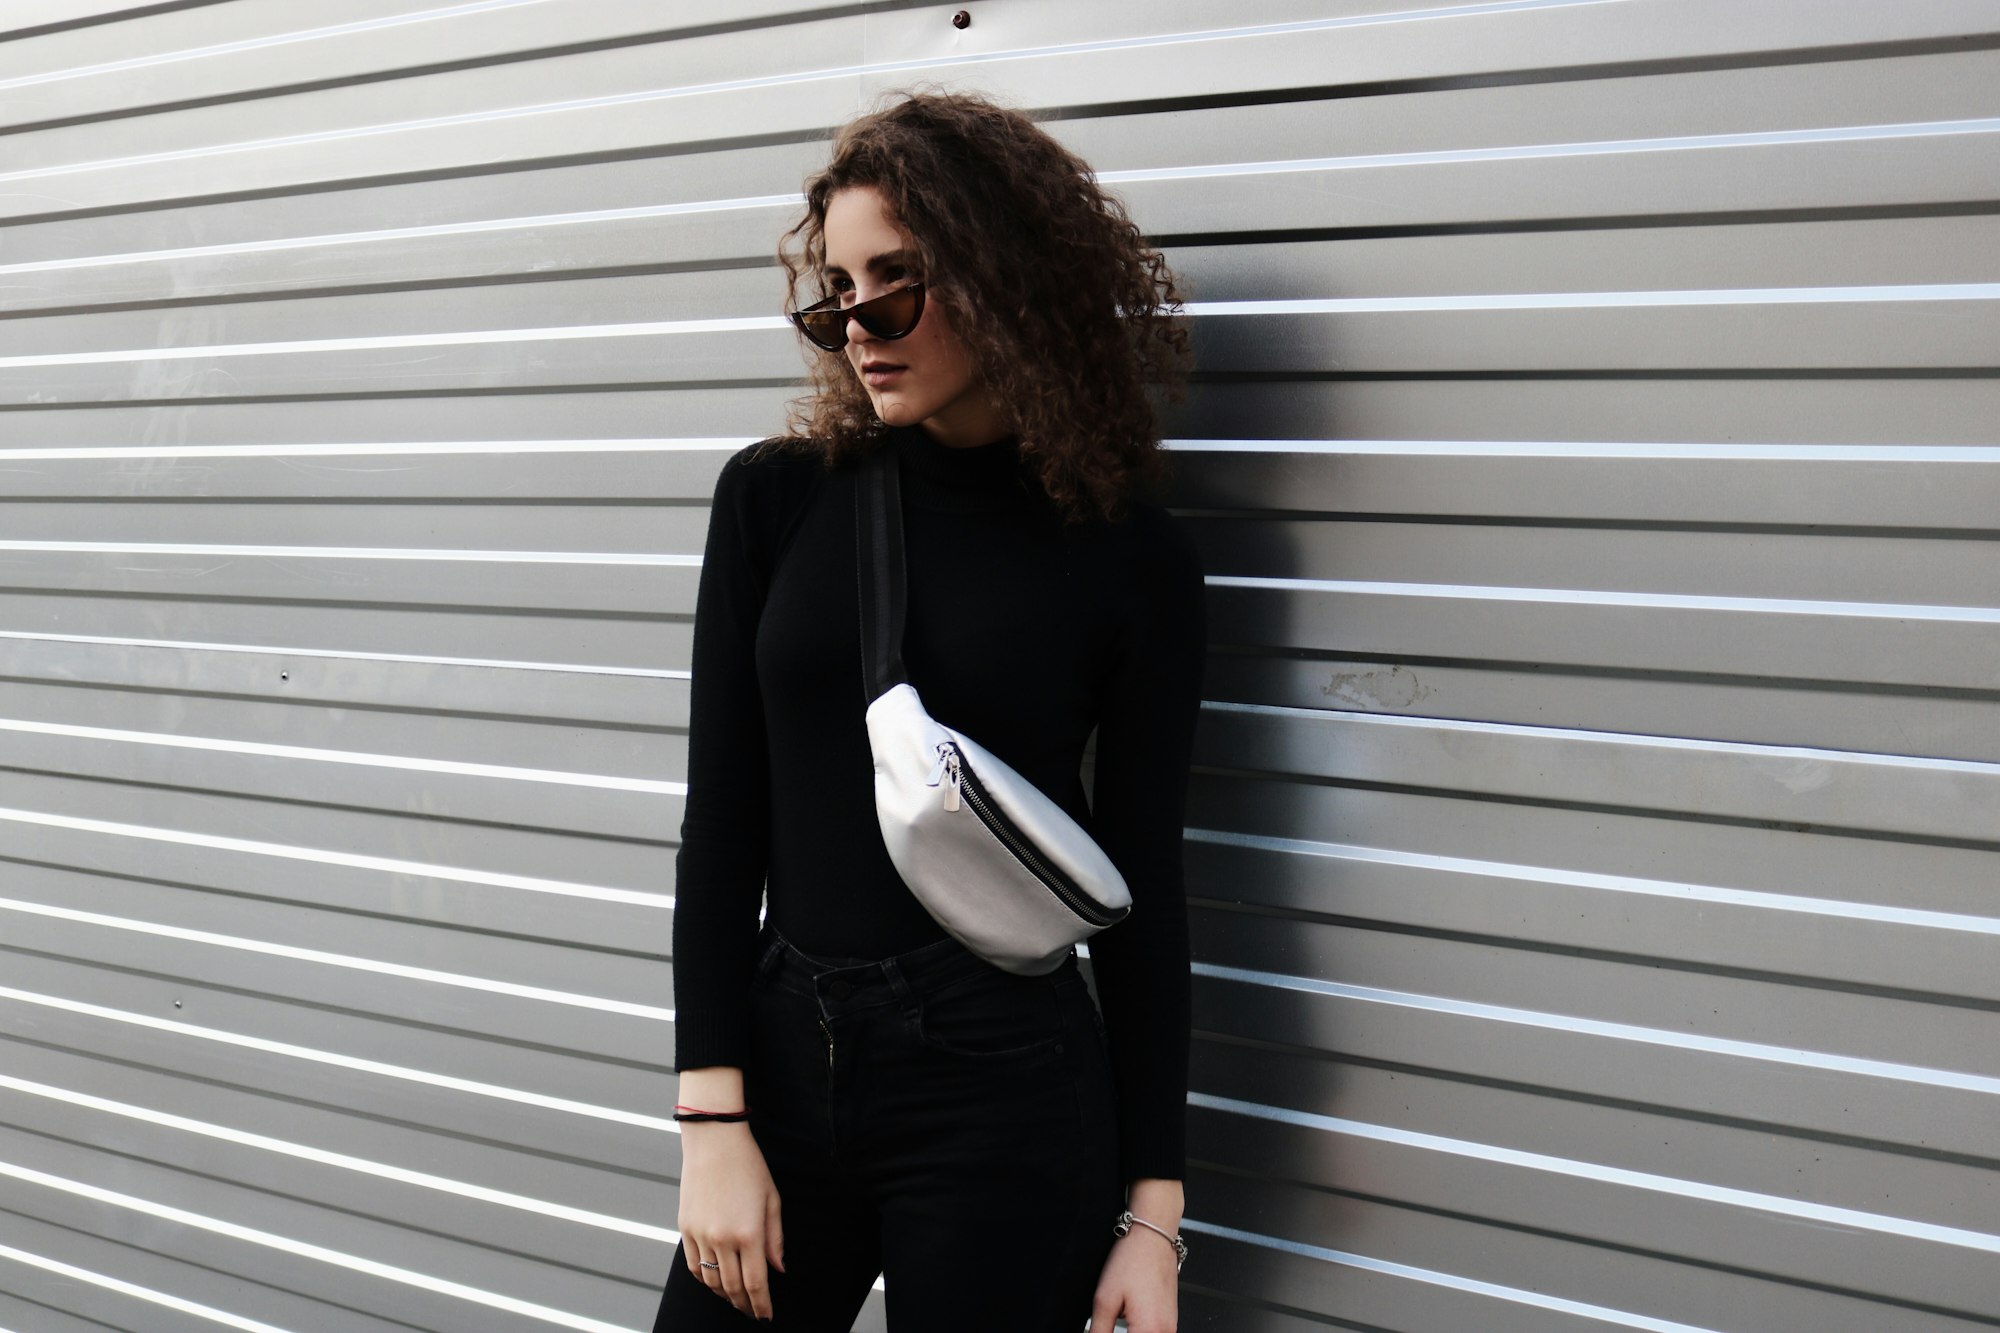 Woman wearing all black with white crossbody bag